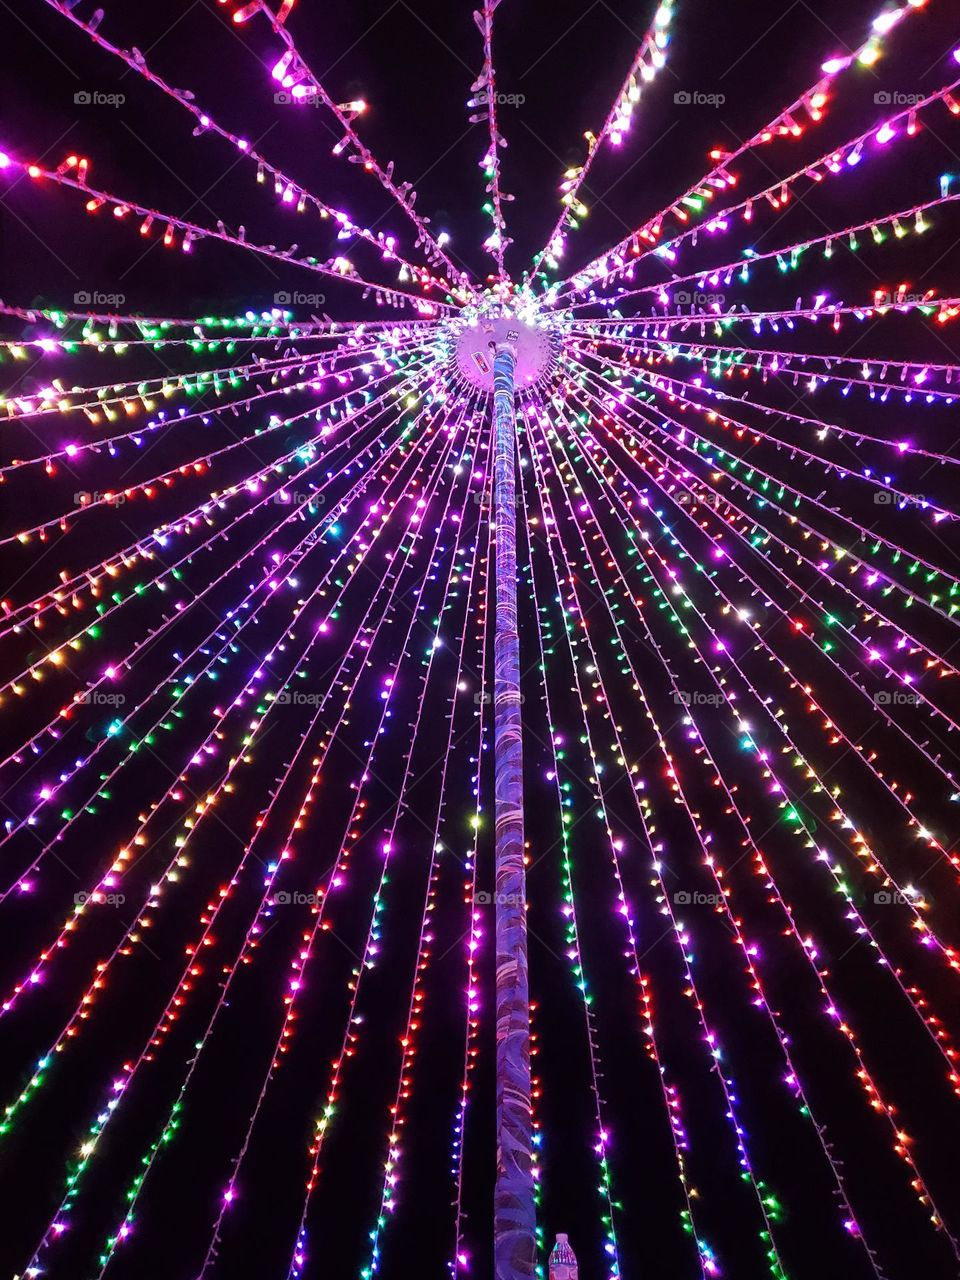 Upward view of colorful LED lights at a festival.